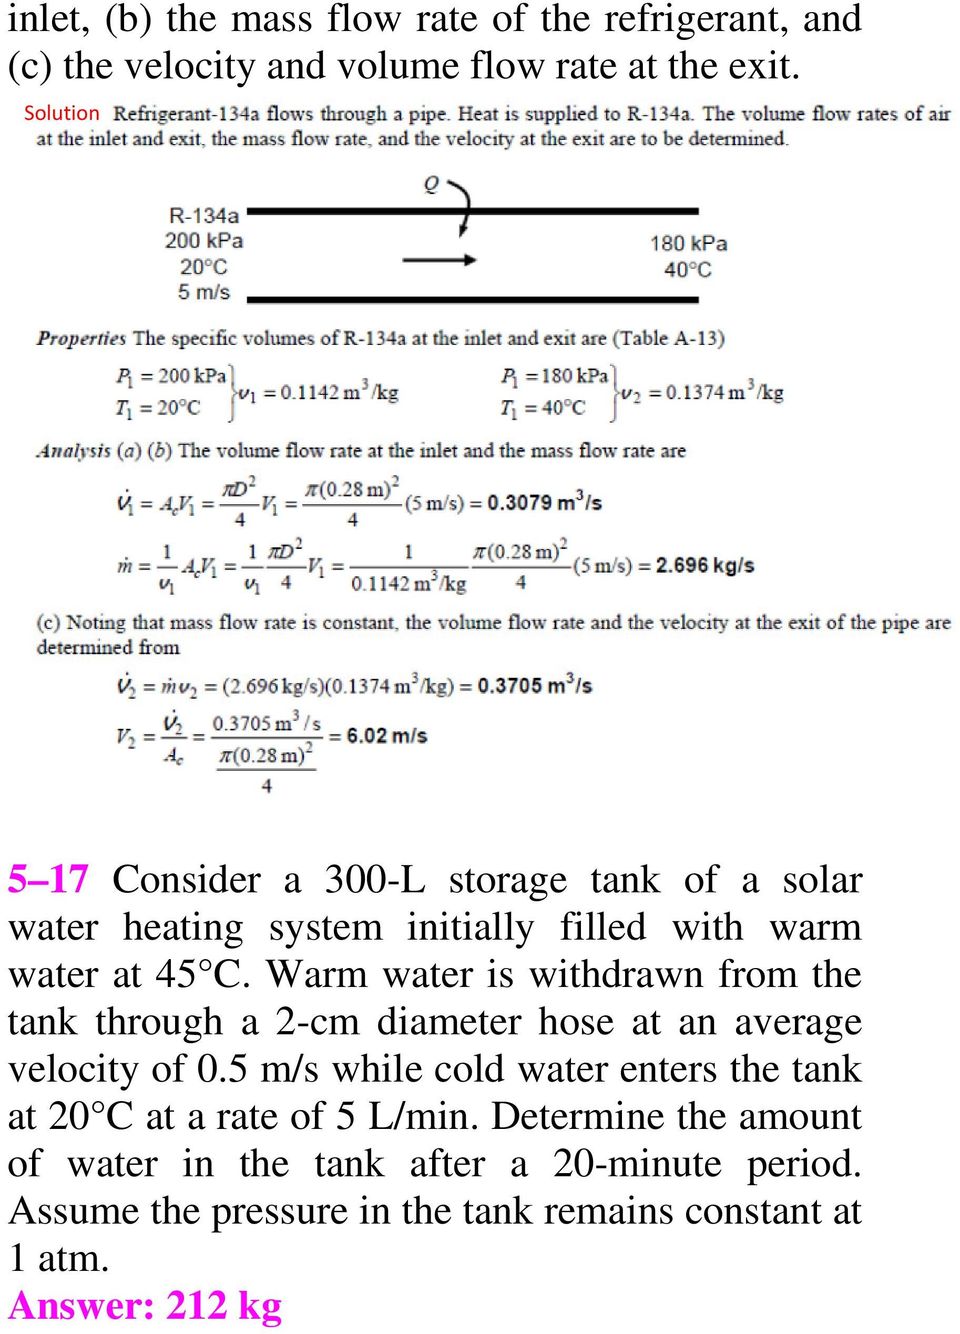 Warm water is withdrawn from the tank through a 2-cm diameter hose at an average velocity of 0.